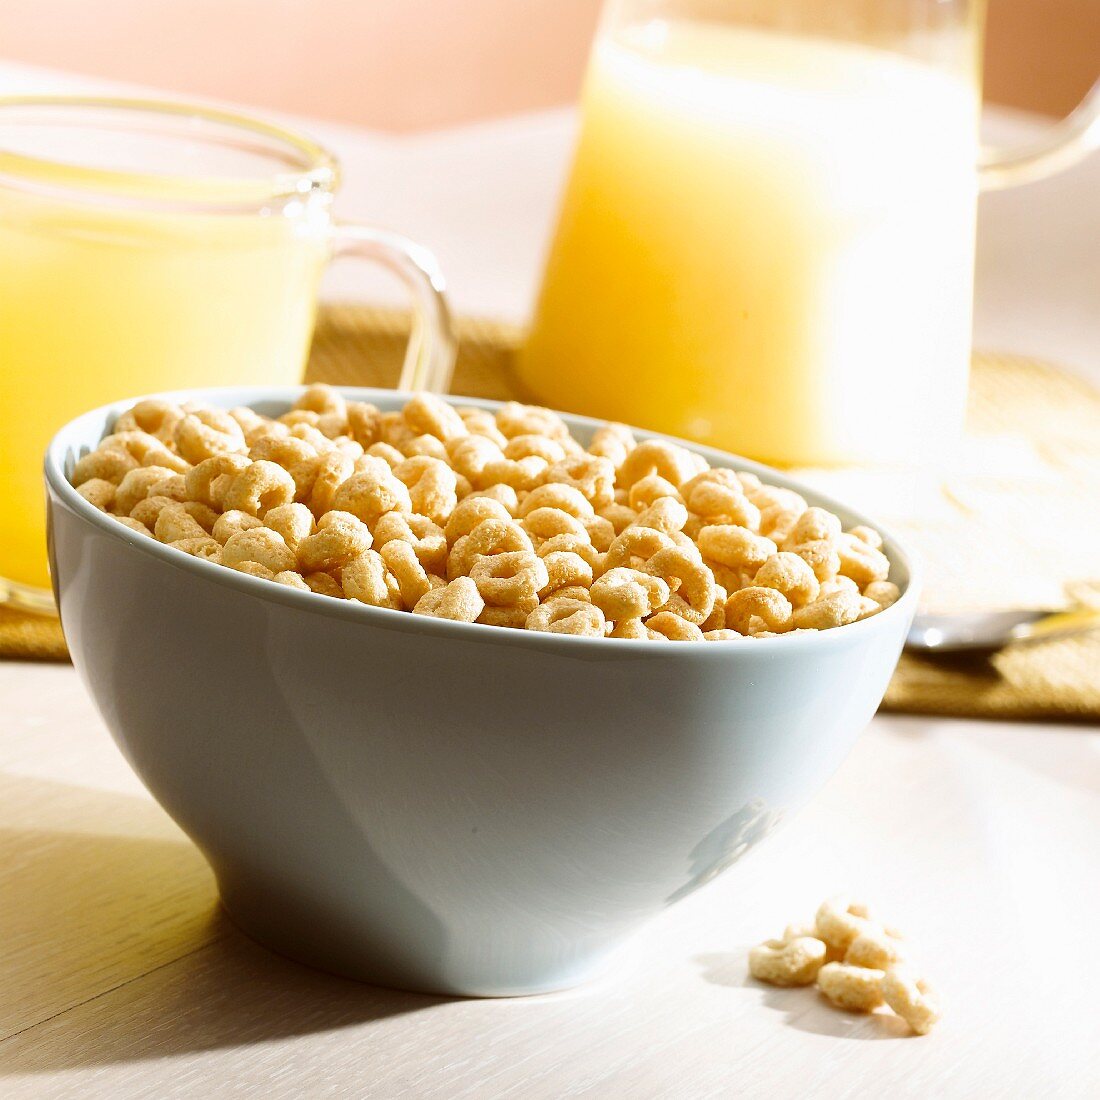 A cup full of ring-shaped cereal and glasses of orange juice